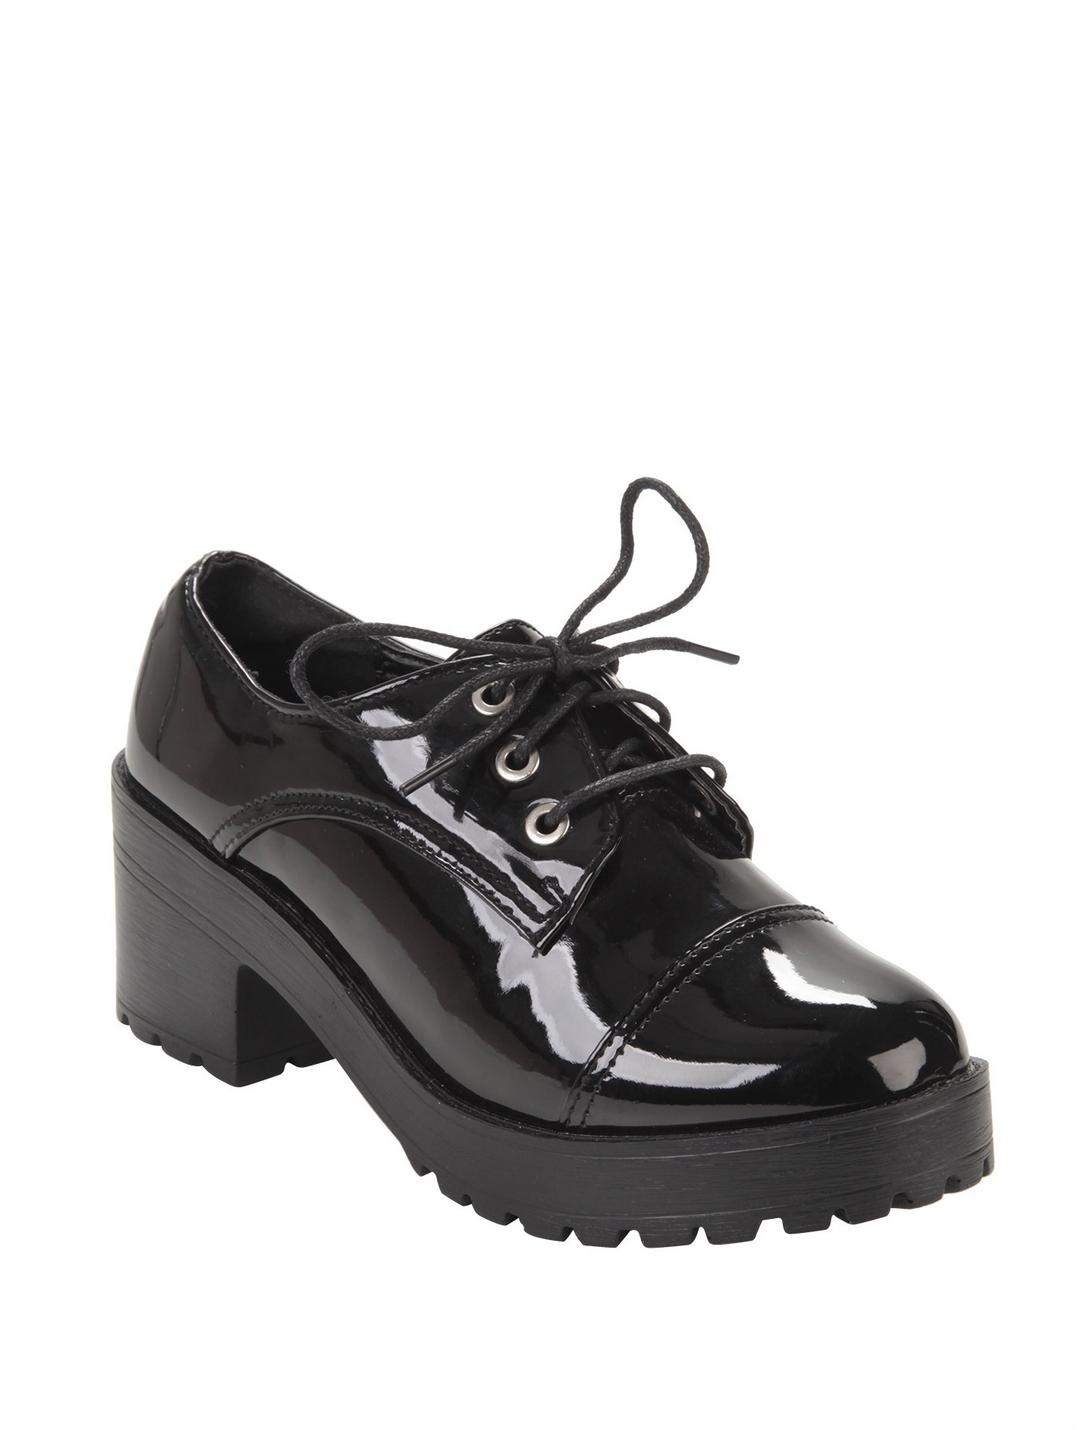 Black Patent Leather Chunky Heel Lace-Up Oxford, BLACK, hi-res